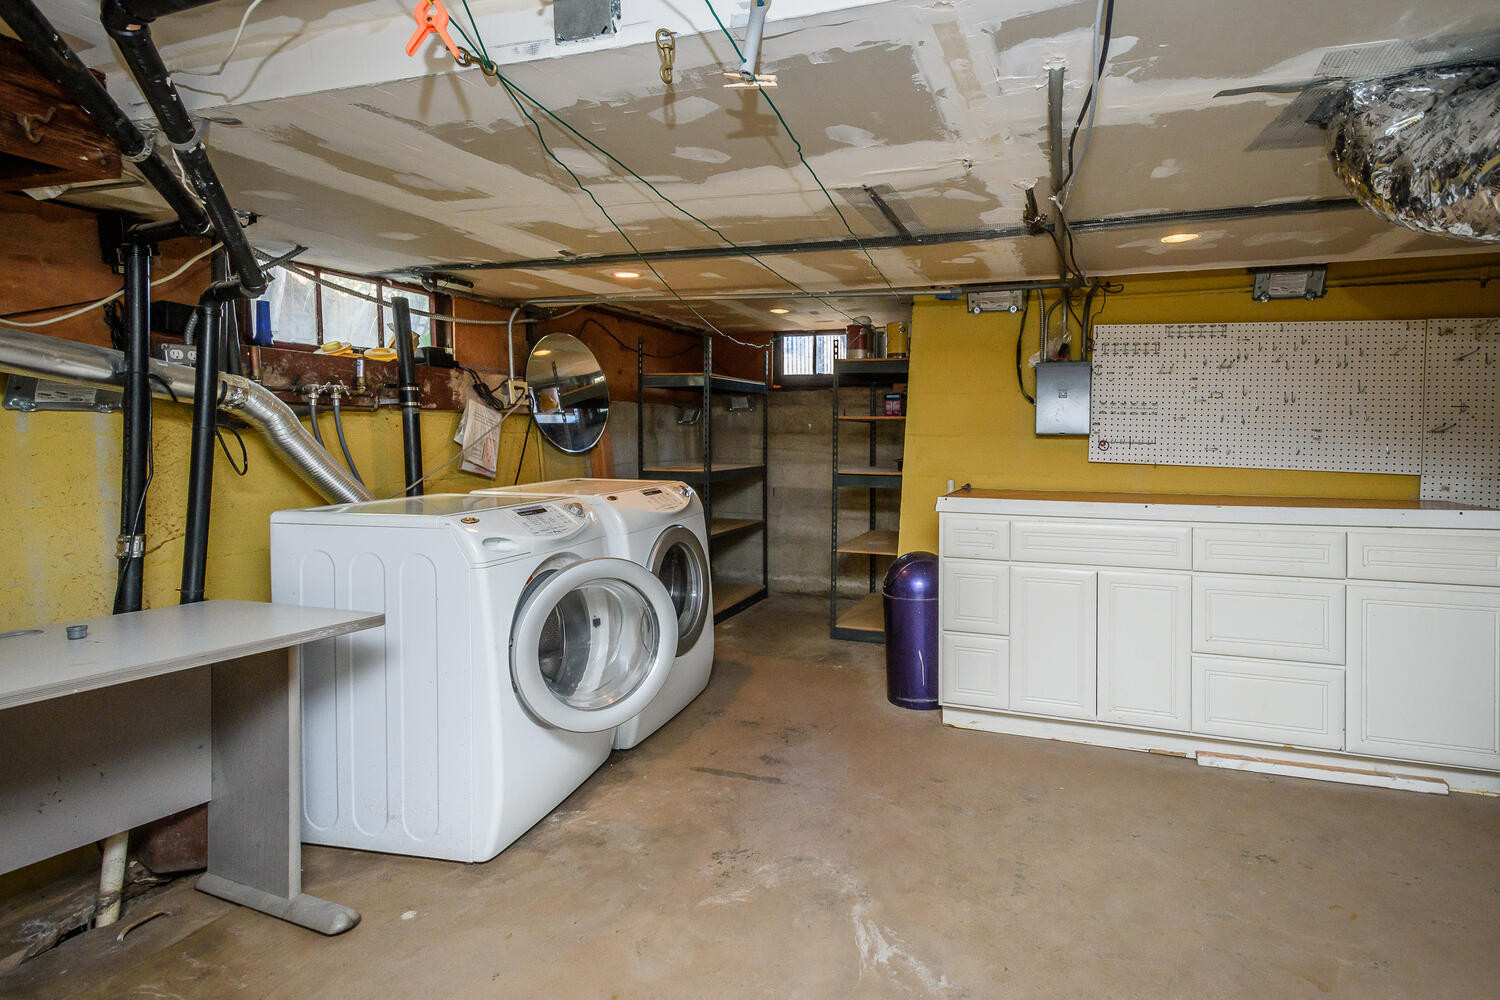 Washer and dryer in the garage in Burlingame Terrace area in Burlingame.